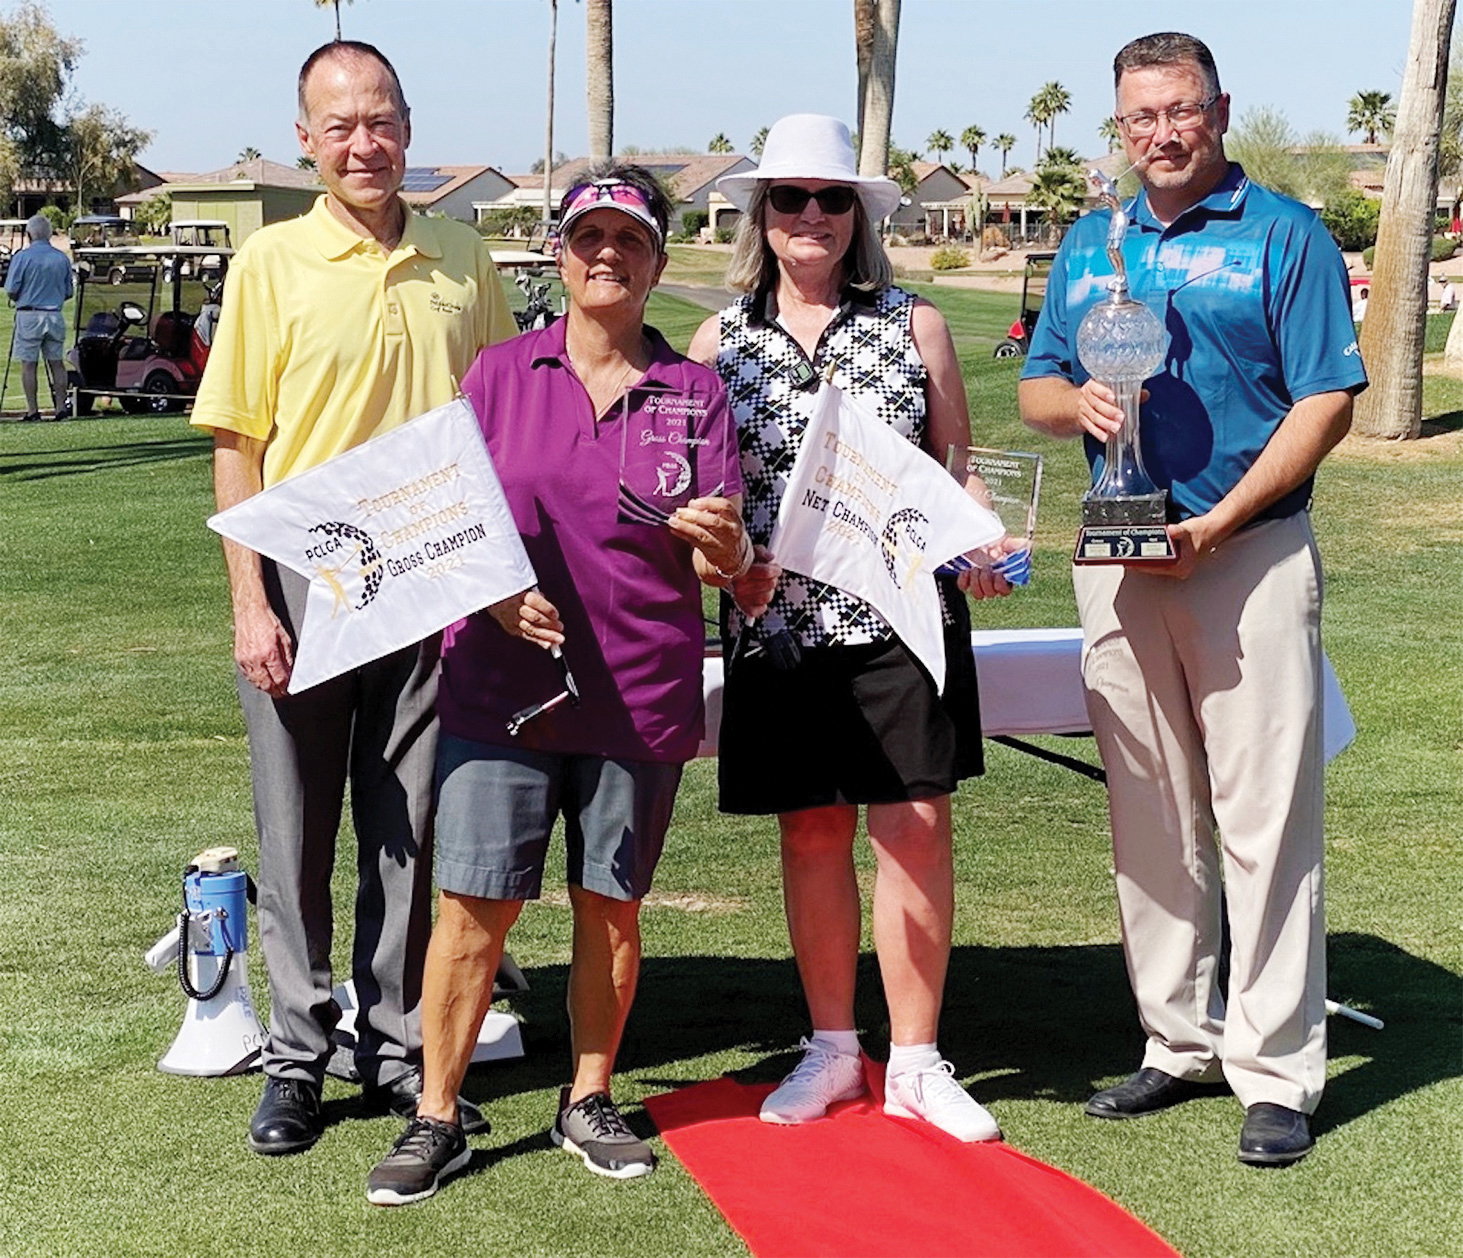 Left to right: Head Pro John McCahan, Gross Champion Andrea Dilger, Net Champion Diana Hull, and Pro Ronnie Decker